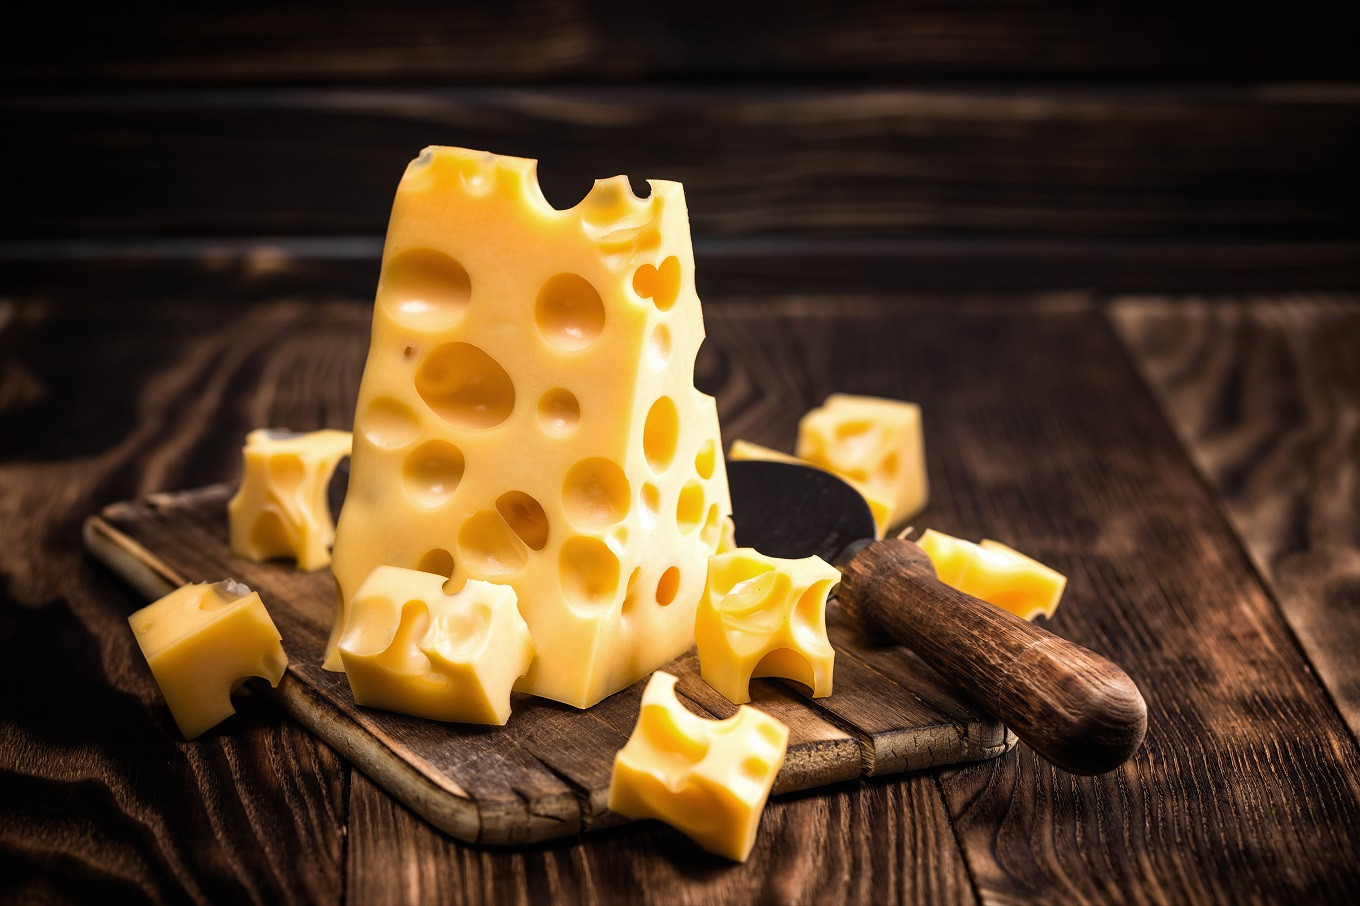 Foods-to-avoid-when-losing-weight:-Cheese